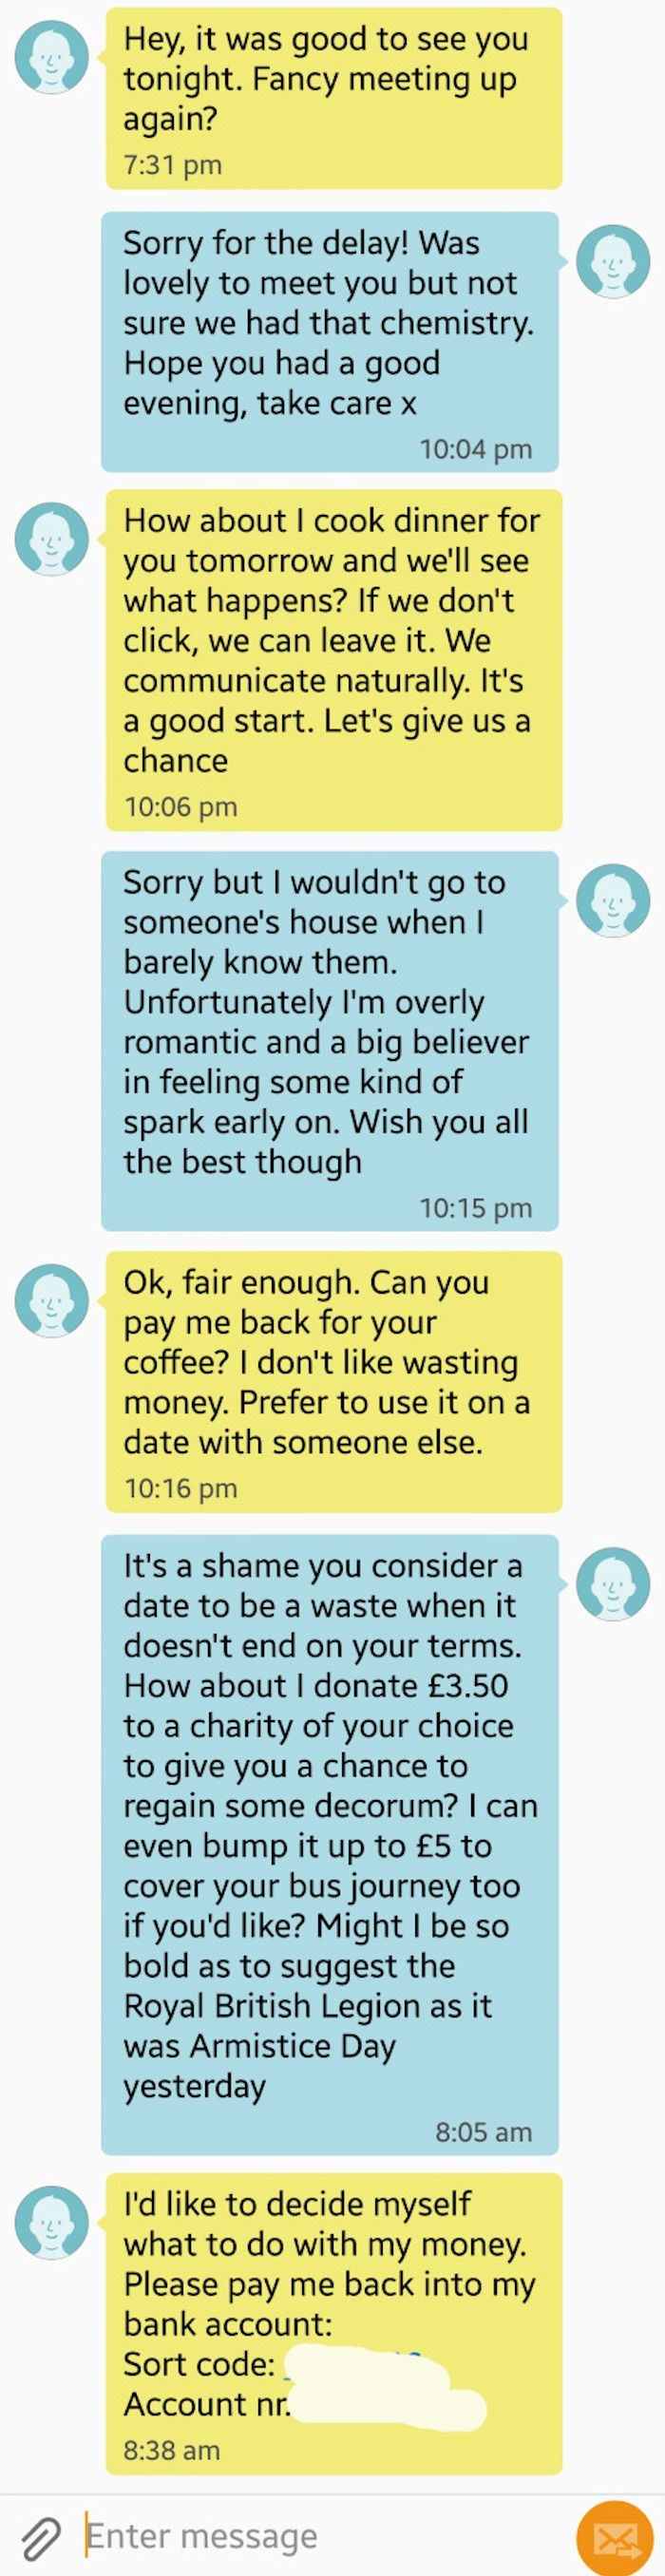 funny fail image tinder date wants his coffee money back